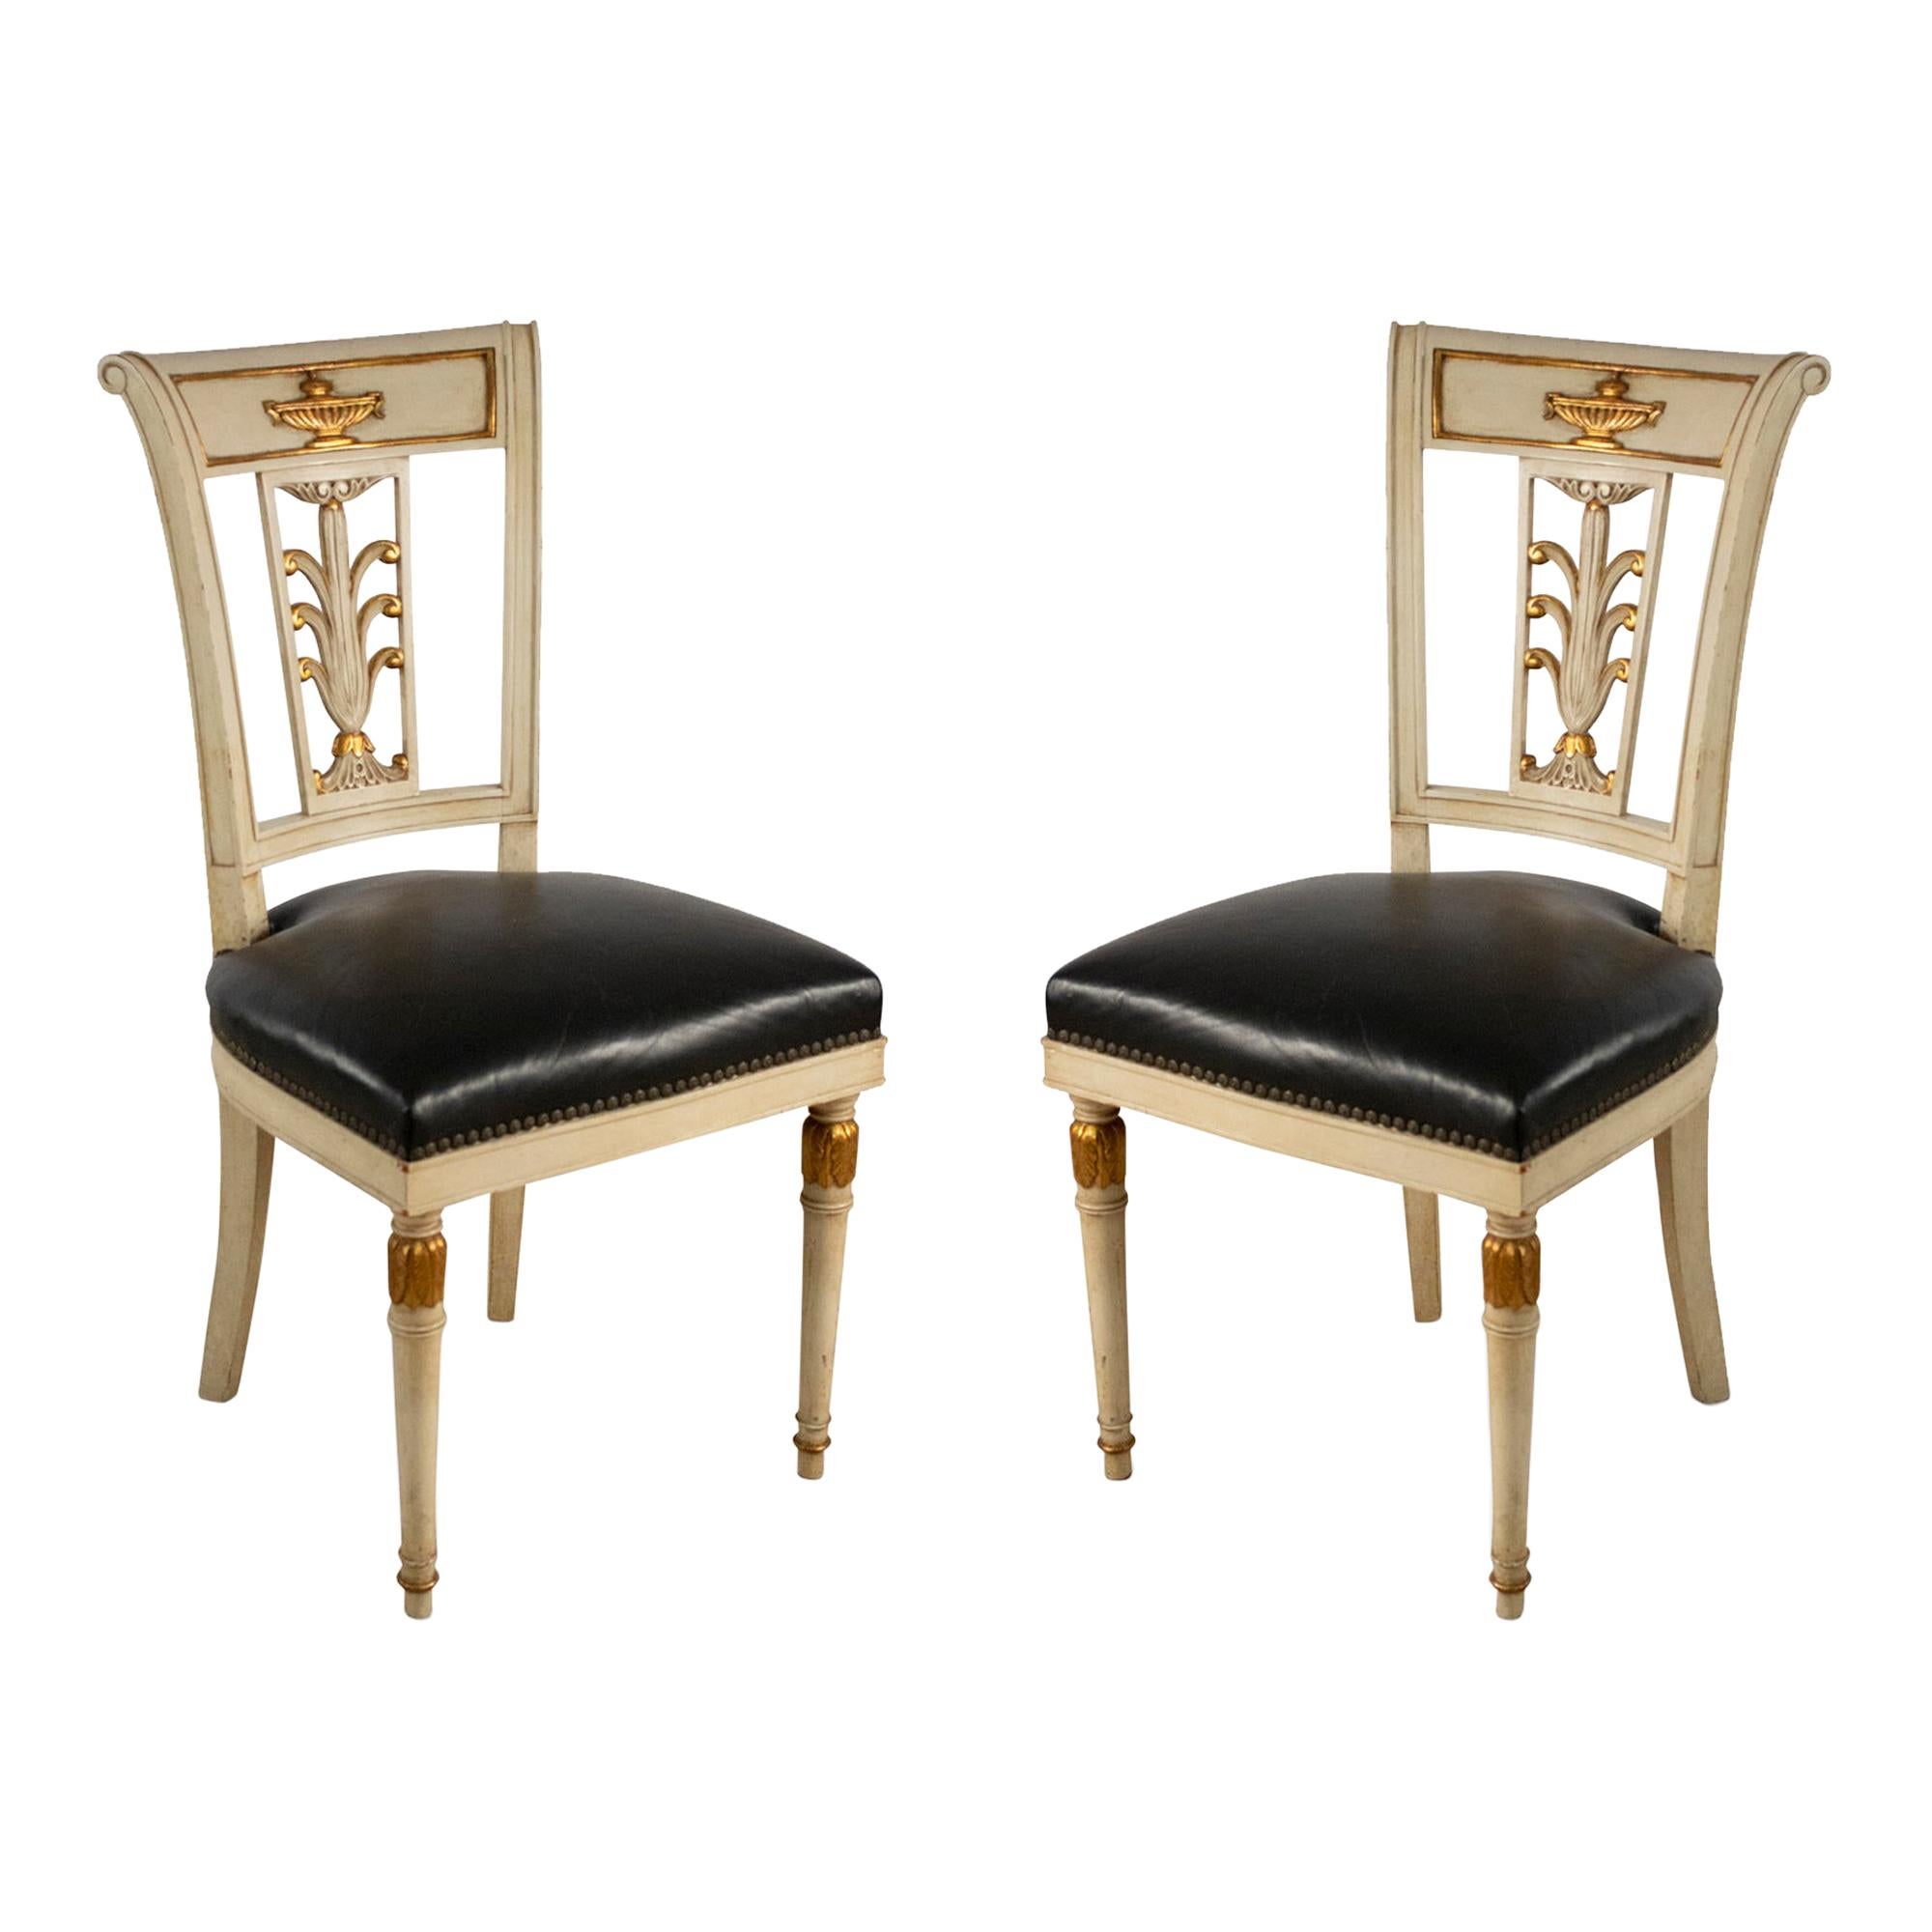 Four Jansen French Directoire Style Gilt Painted Wood and Leather Side Chairs